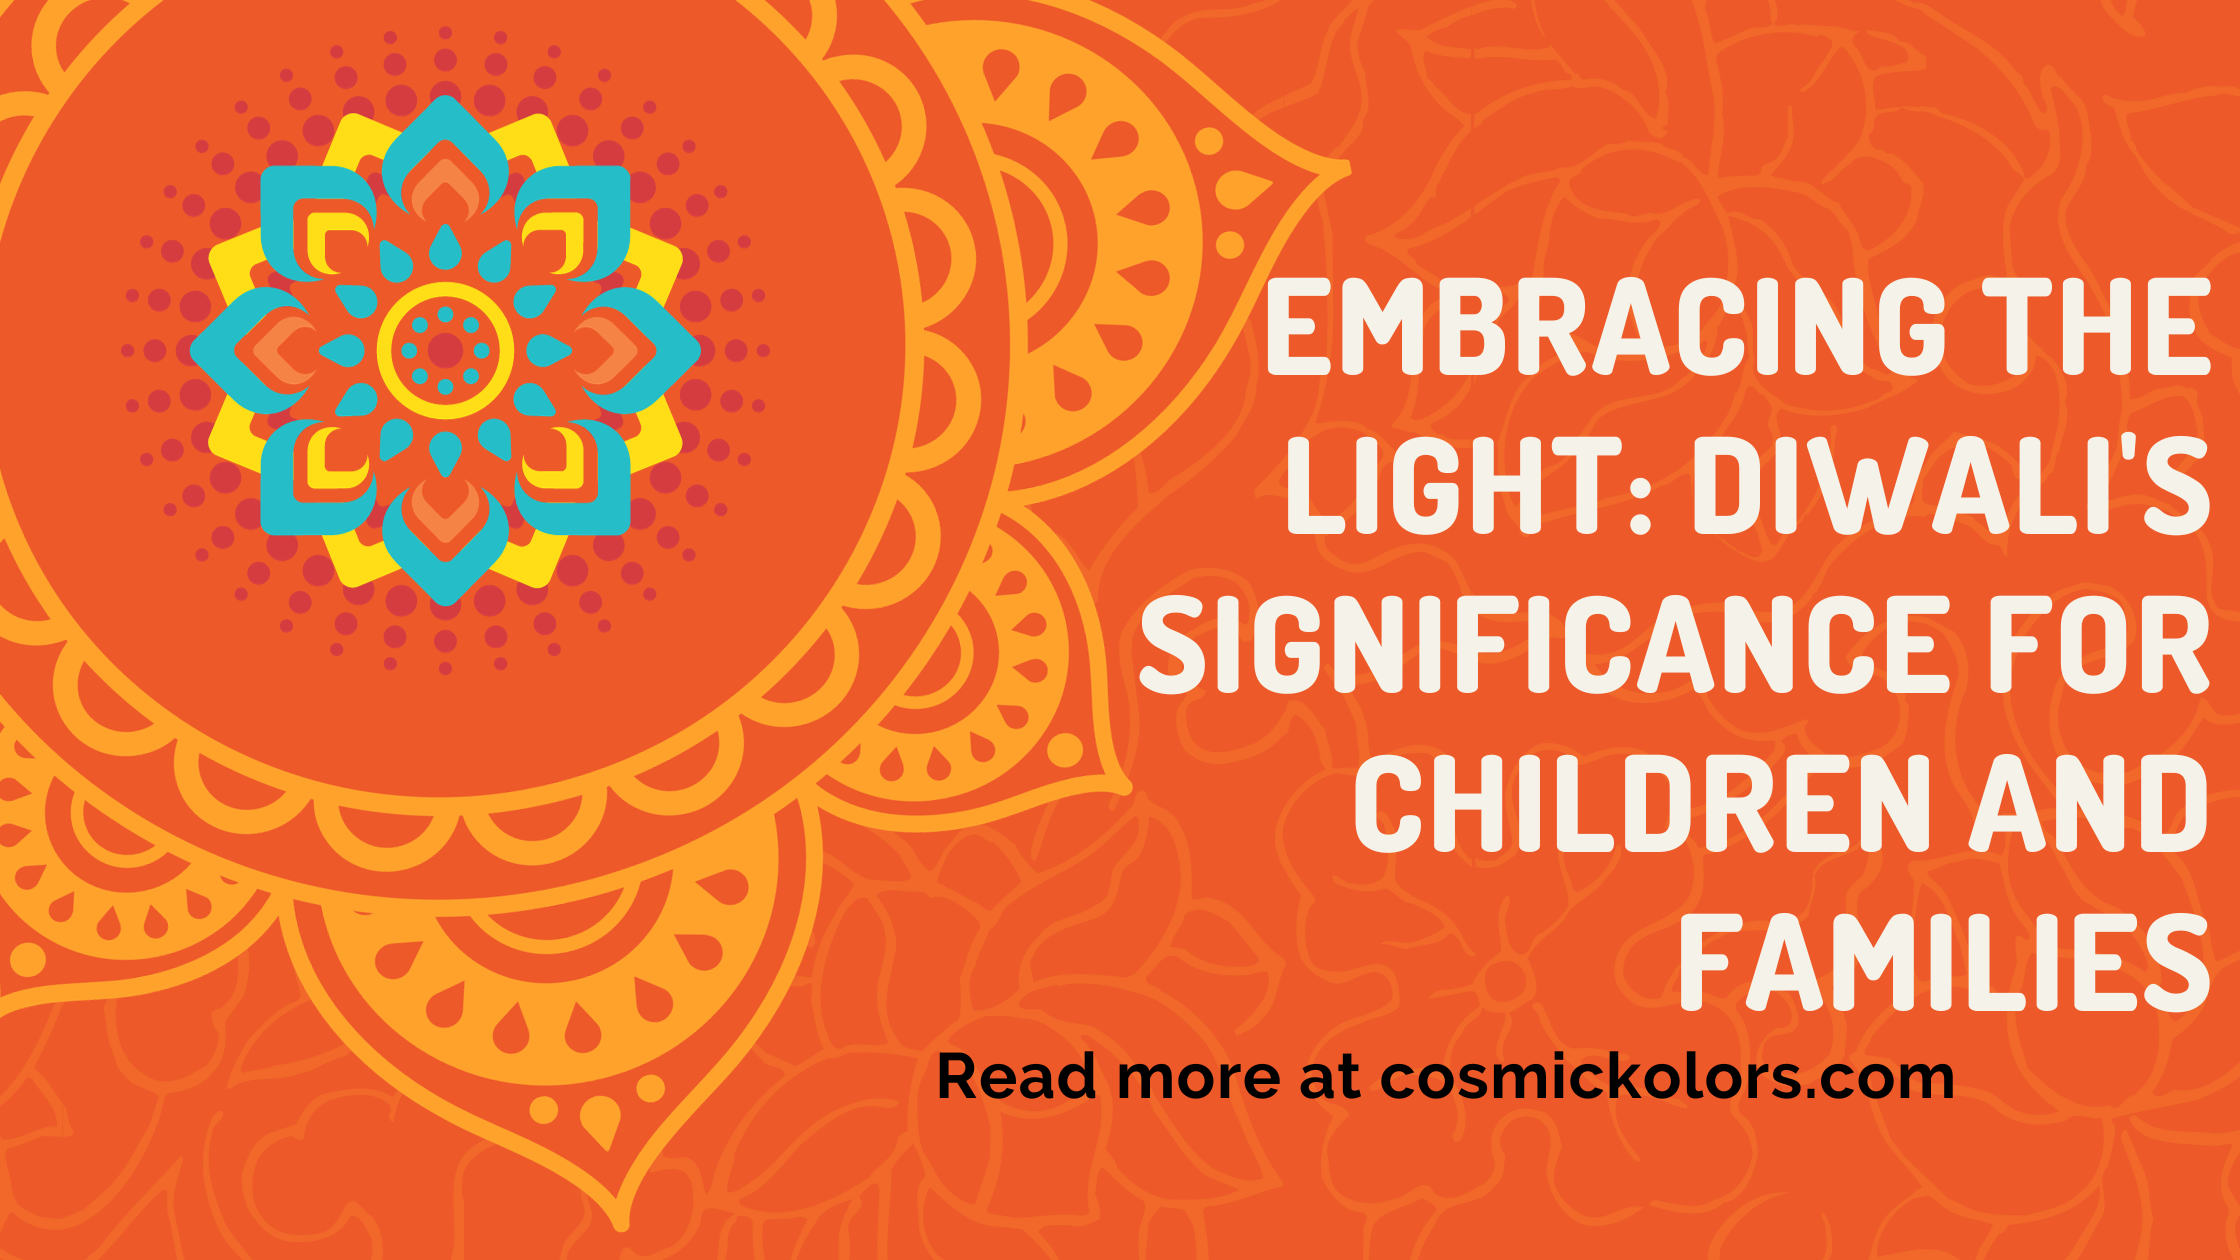 Embracing the Light: Diwali’s Significance for Children and Families